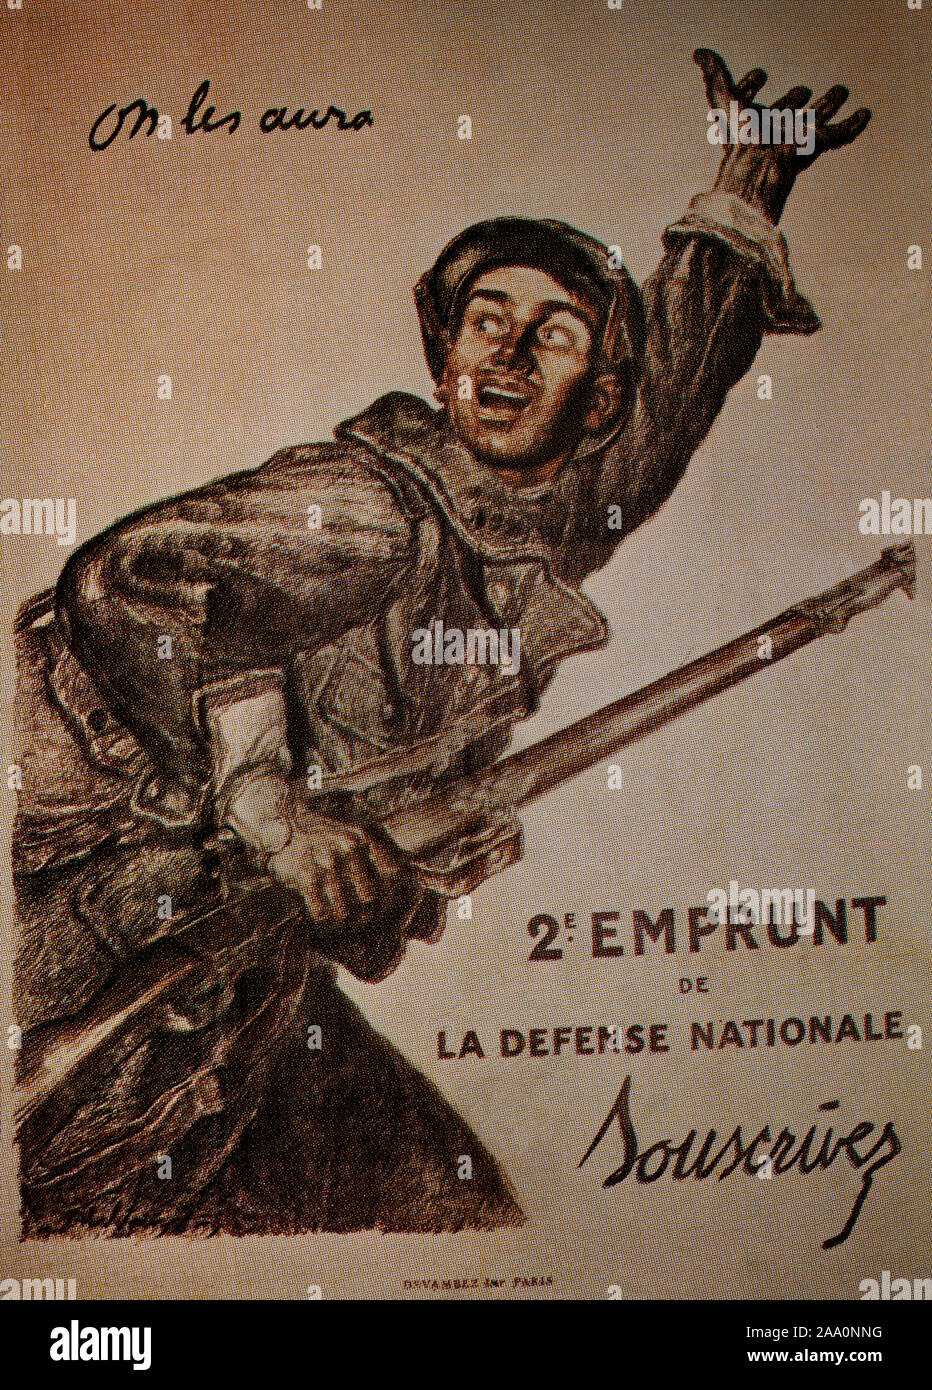 A World War One French recruitment poster from 1917 , using the term 'On les aura' or 'we will have them'. Stock Photo